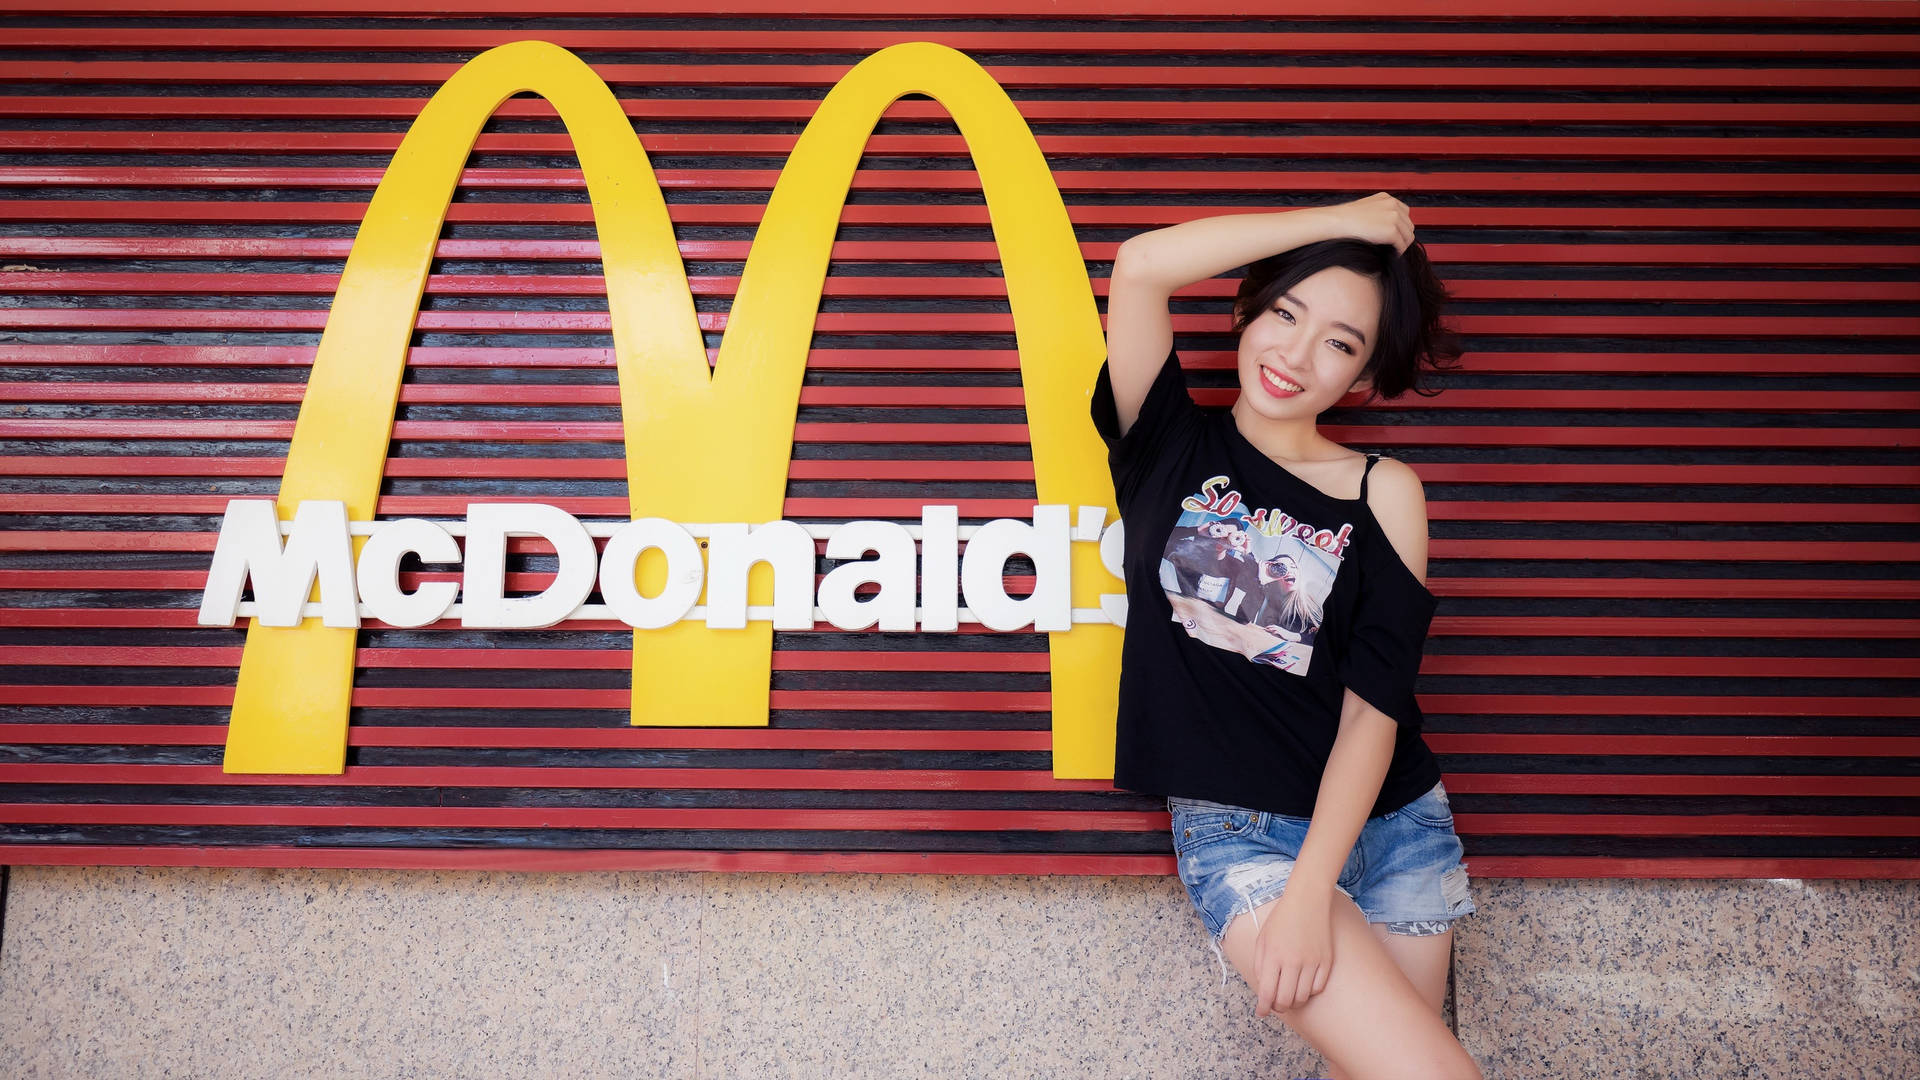 2560X1440 Mcdonalds Wallpaper and Background